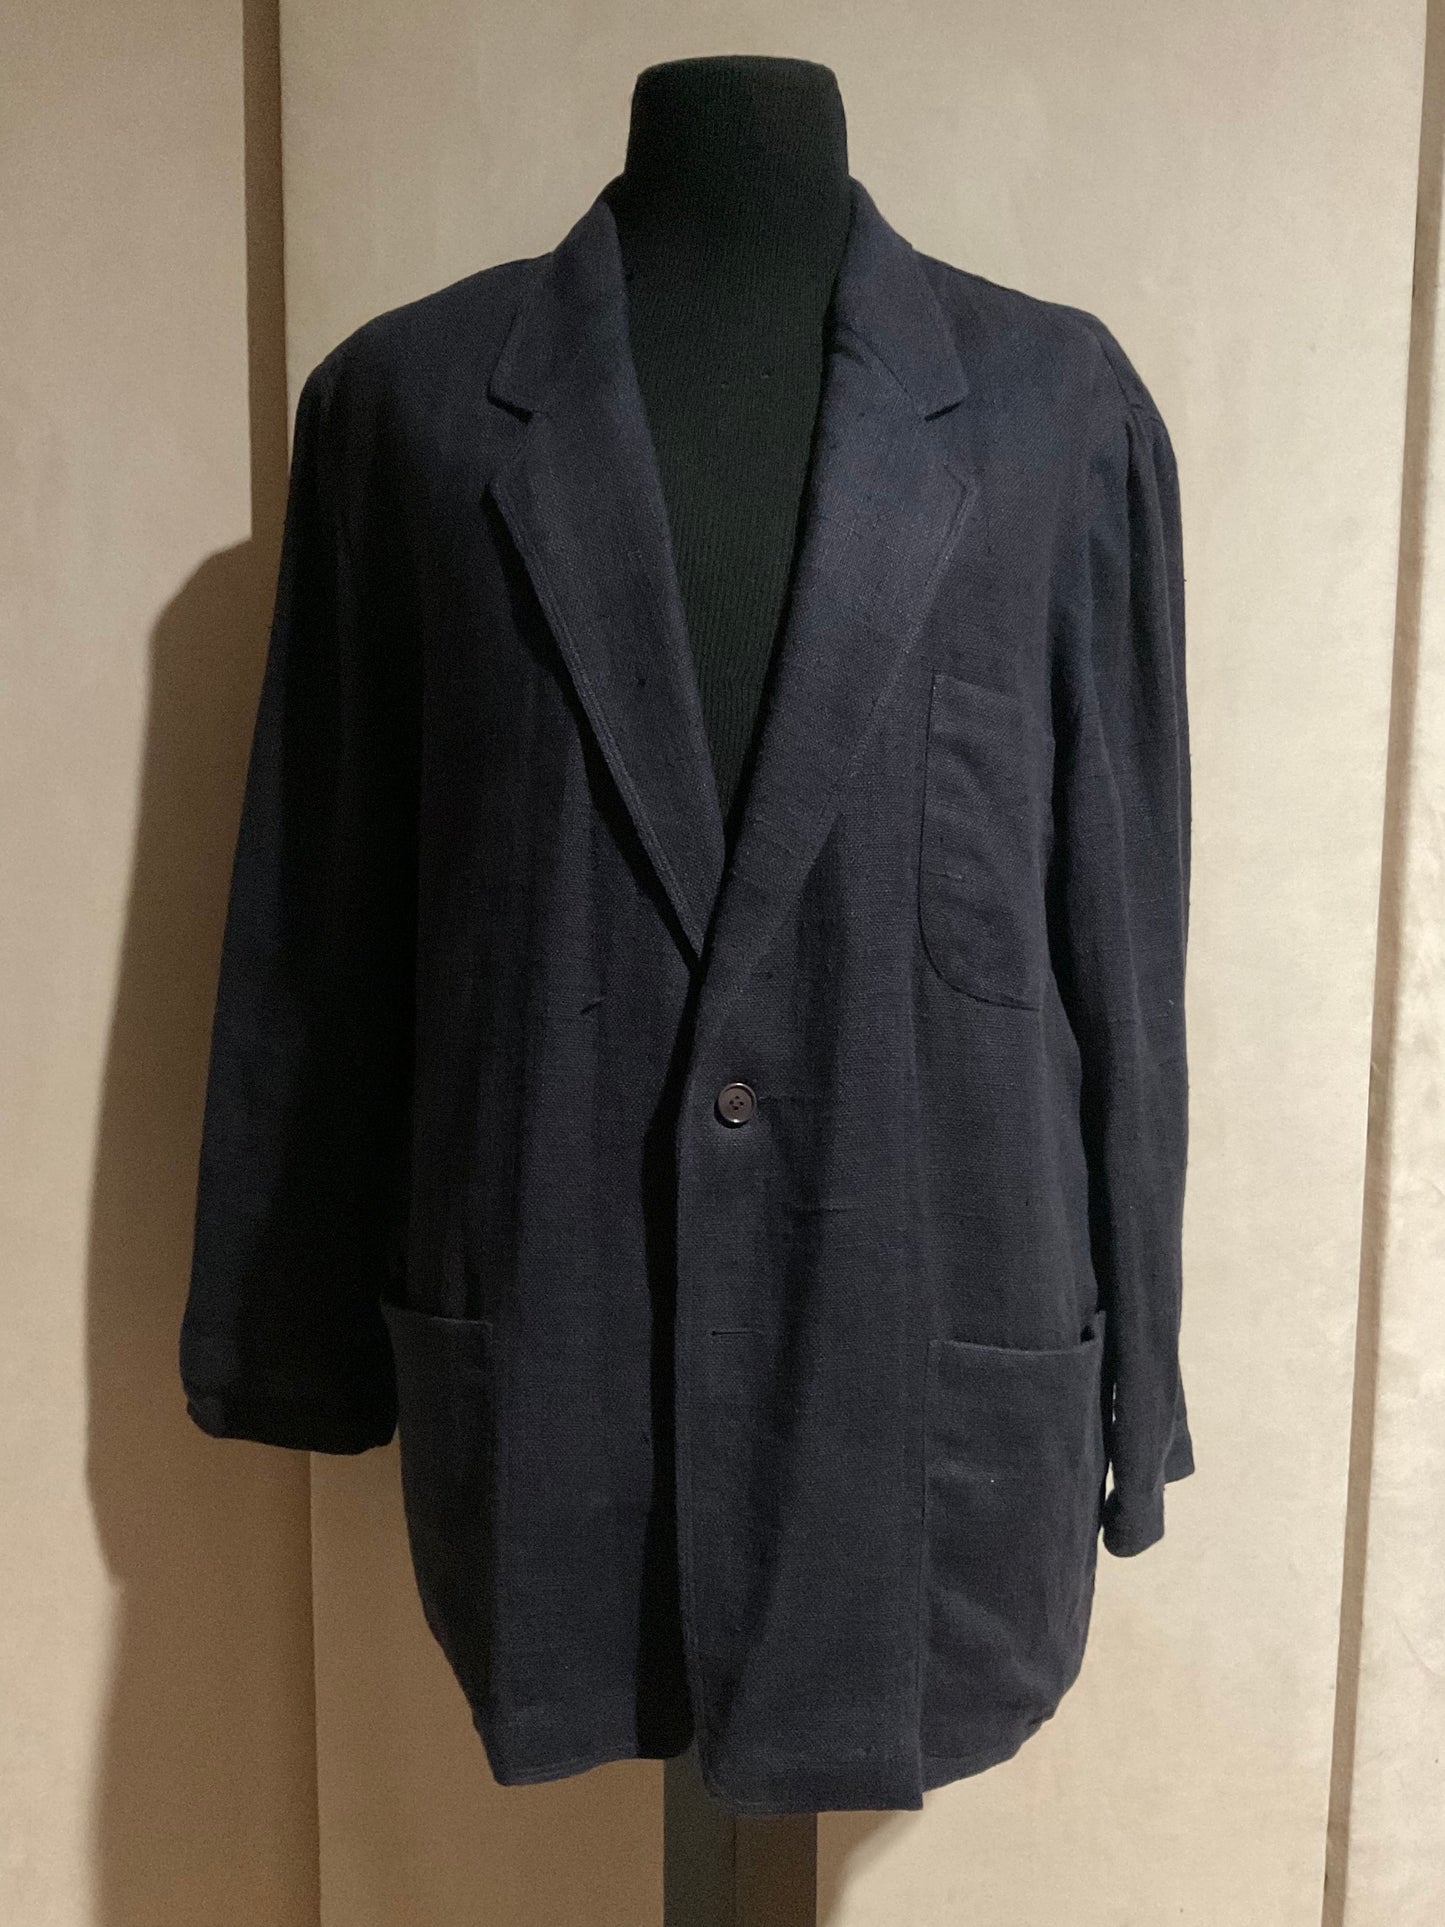 R P SPORTS JACKET / NAVY LINEN / UNCONSTRUCTED / LARGE - EXTRA LARGE / NEW / MADE IN ITALY